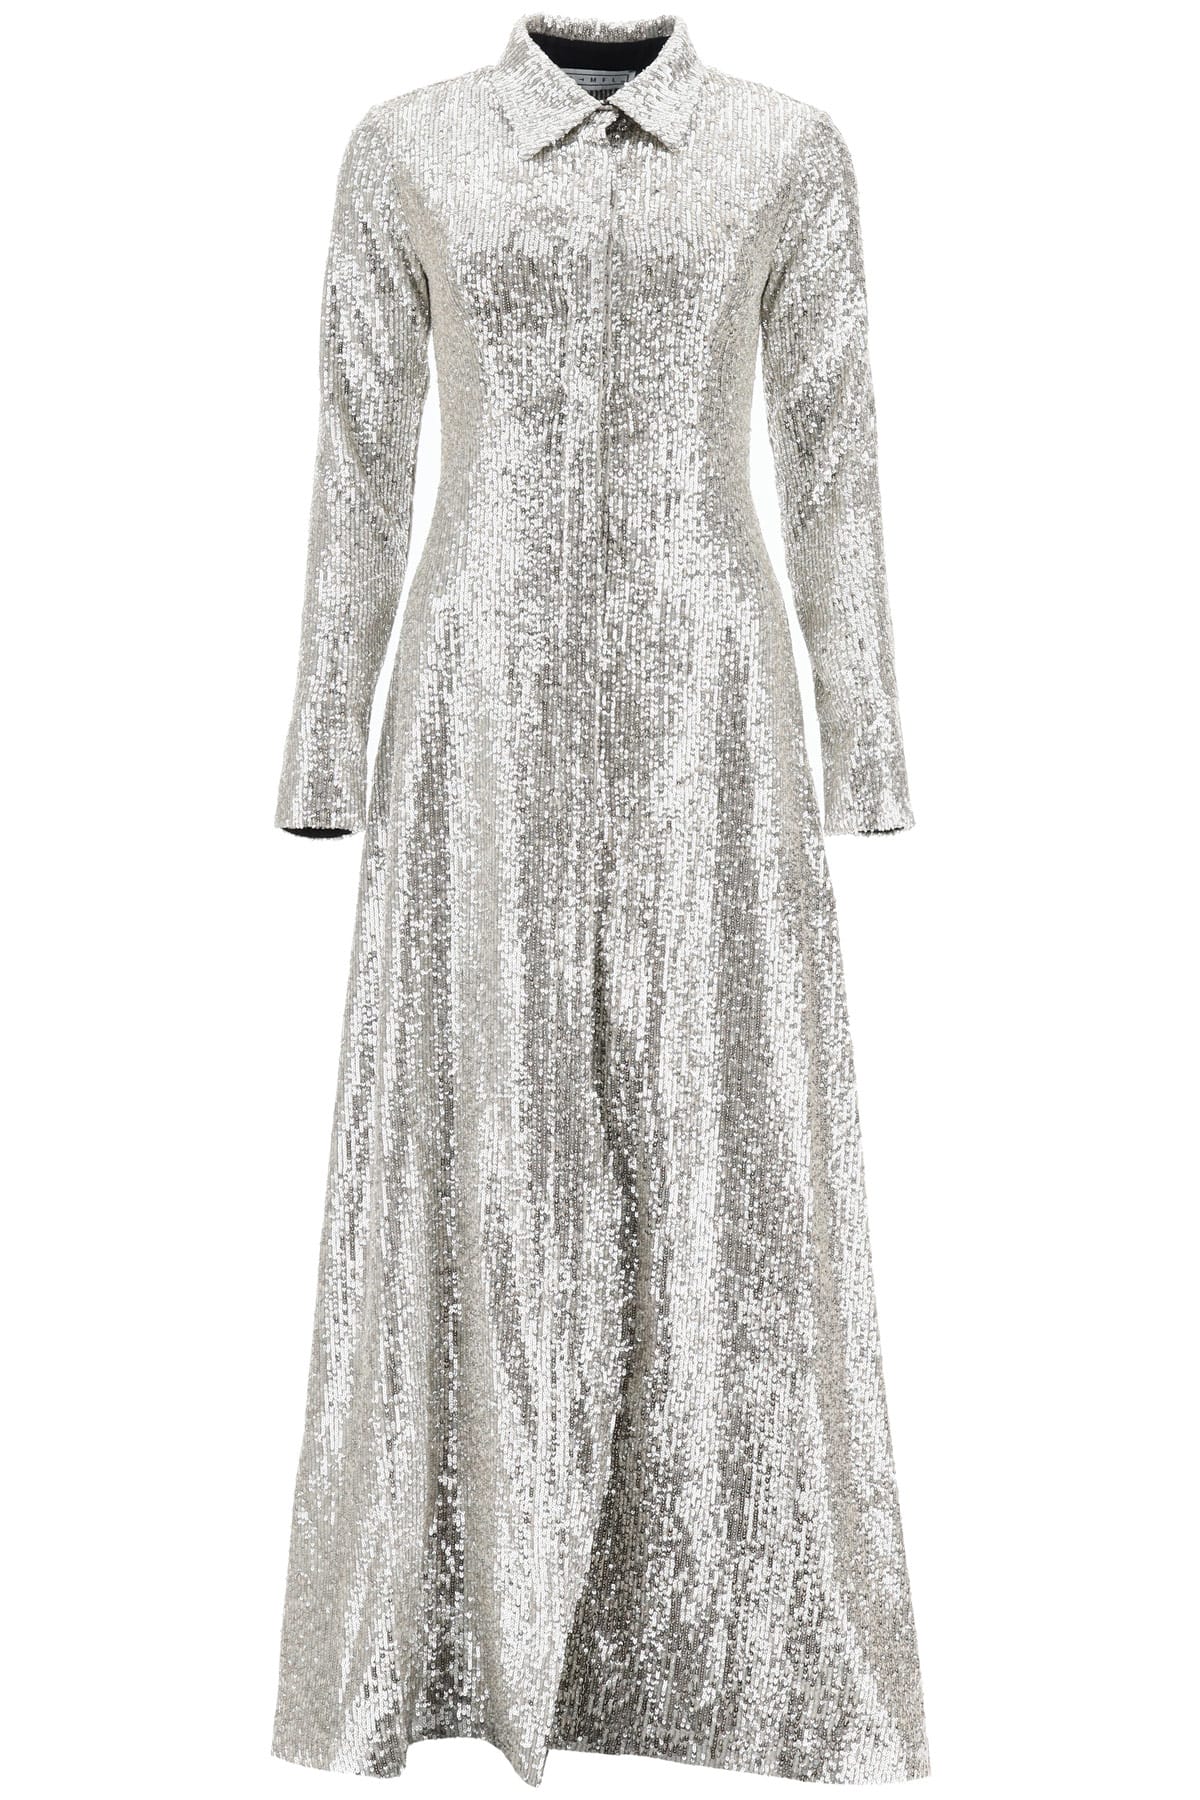 In The Mood For Love Moya Sequined Dress